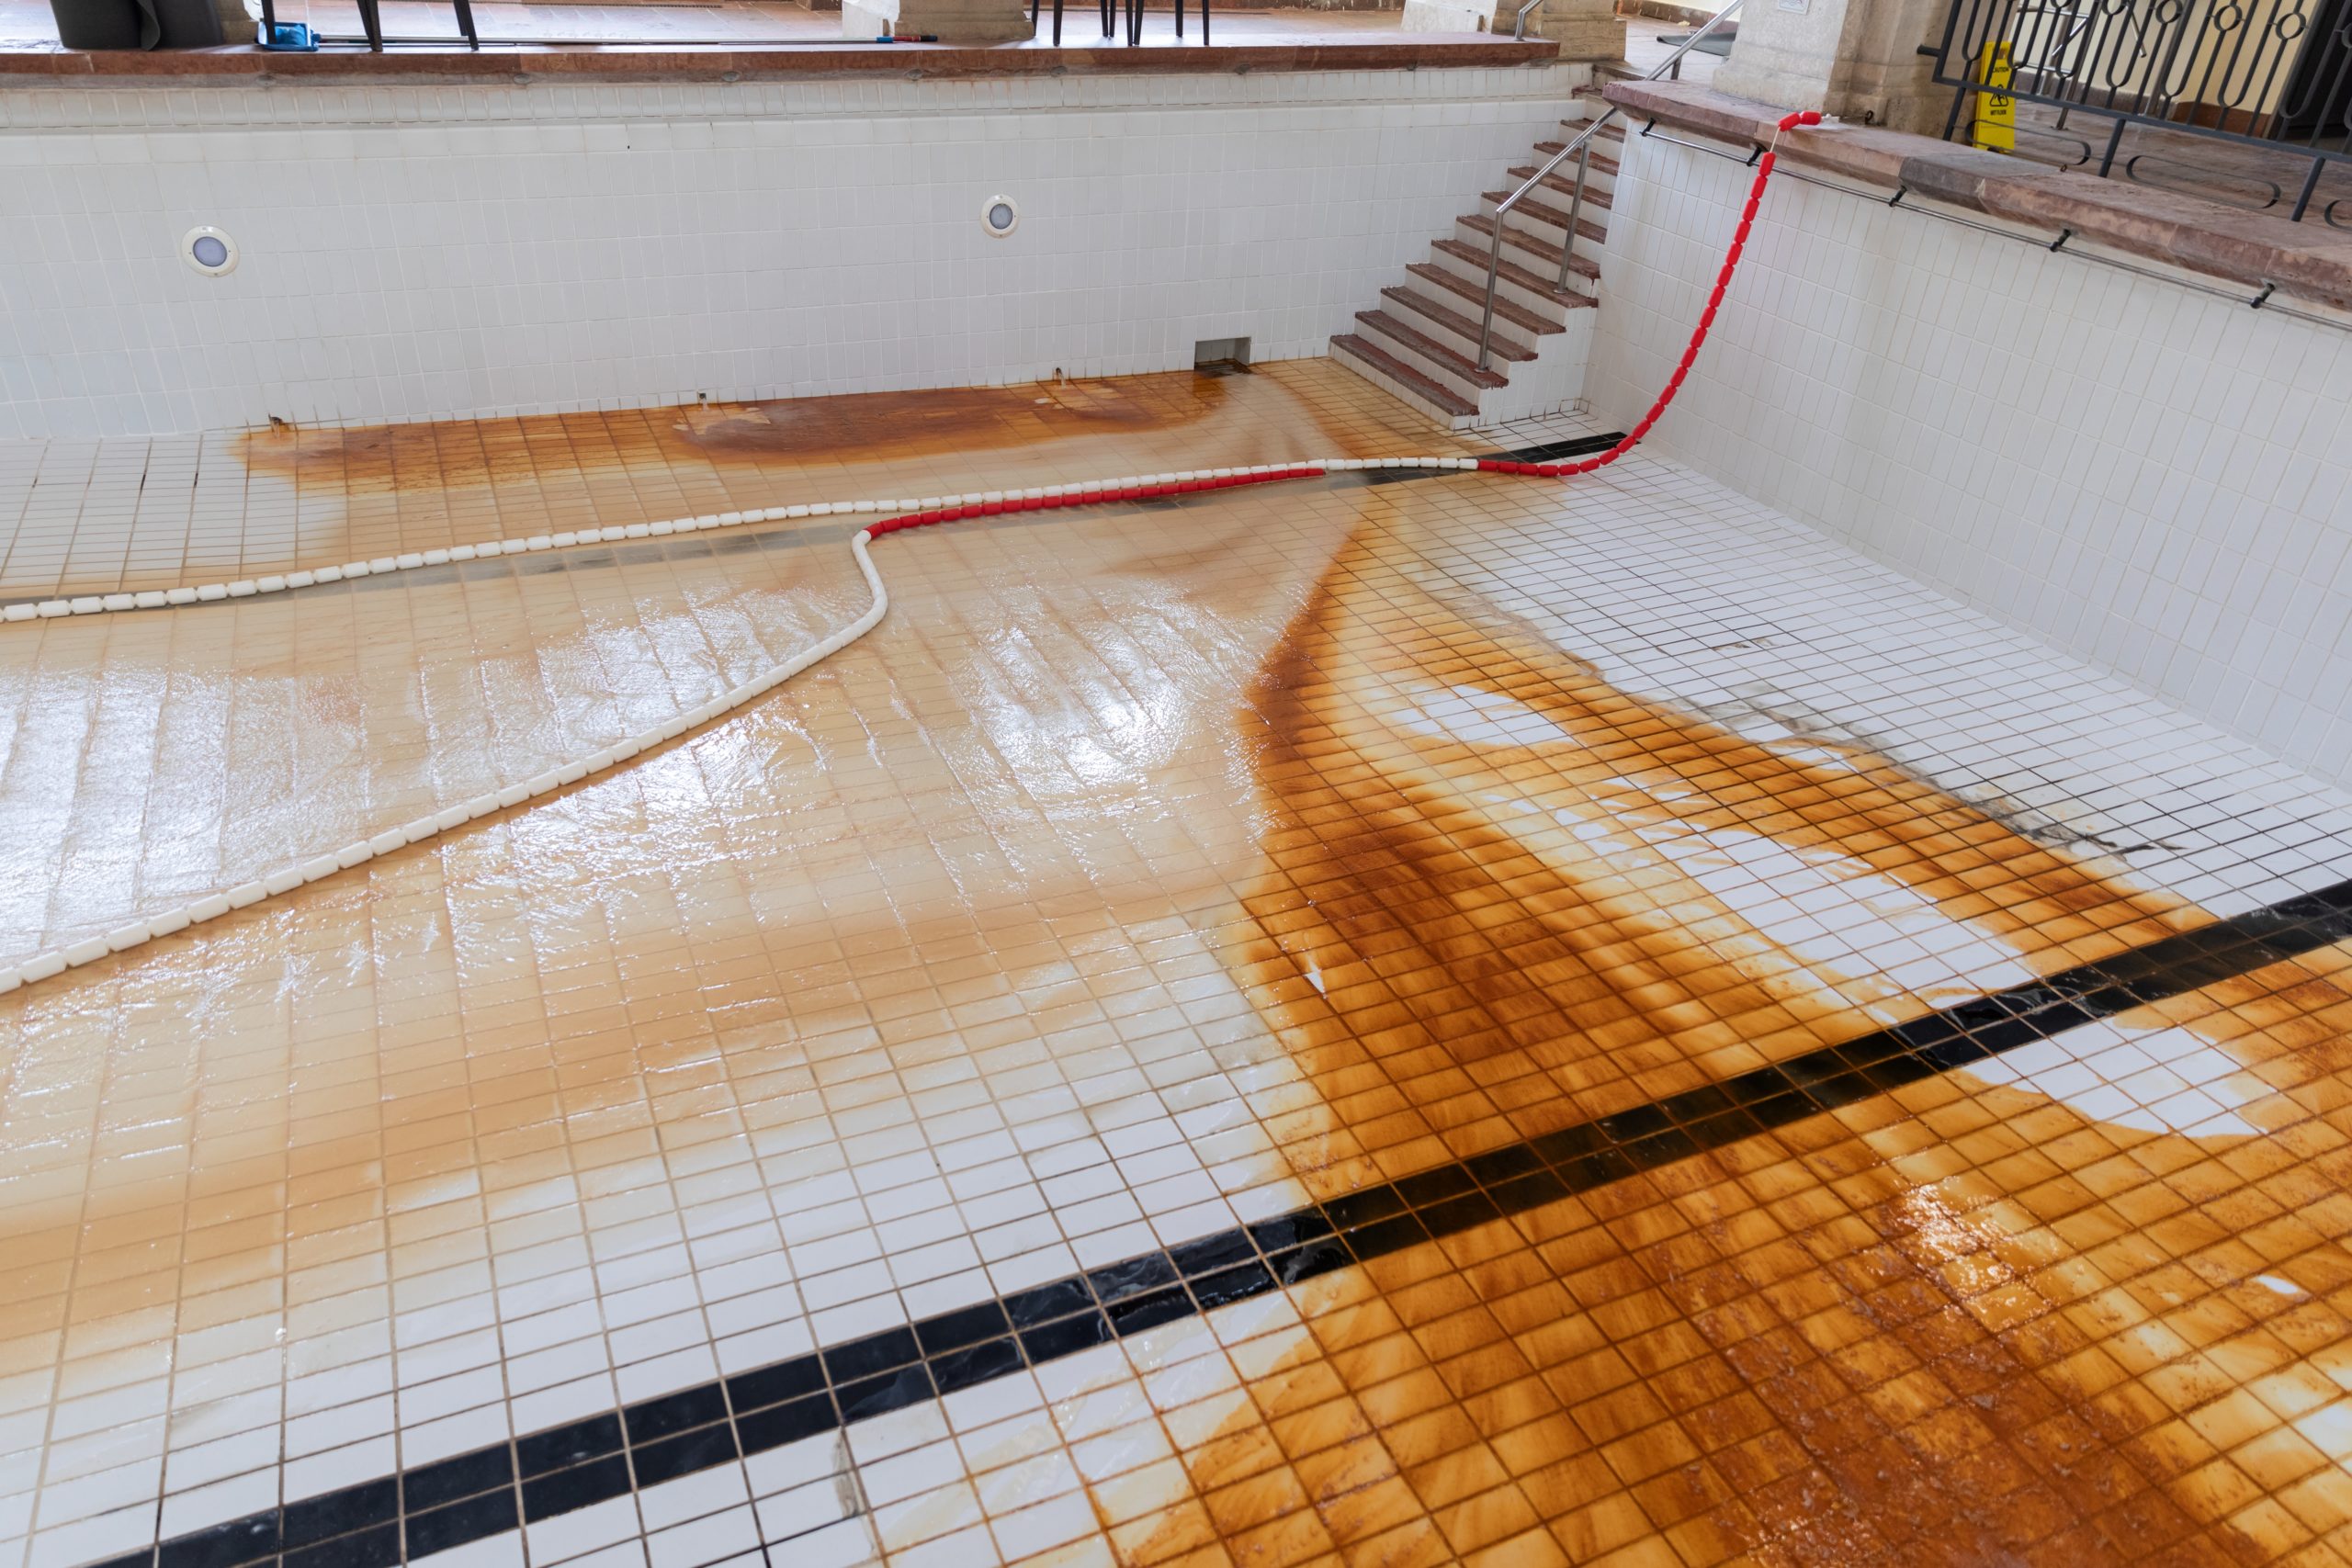 A drained pool with dirty, brown-colored residue at the bottom, indicating the need for cleaning and maintenance